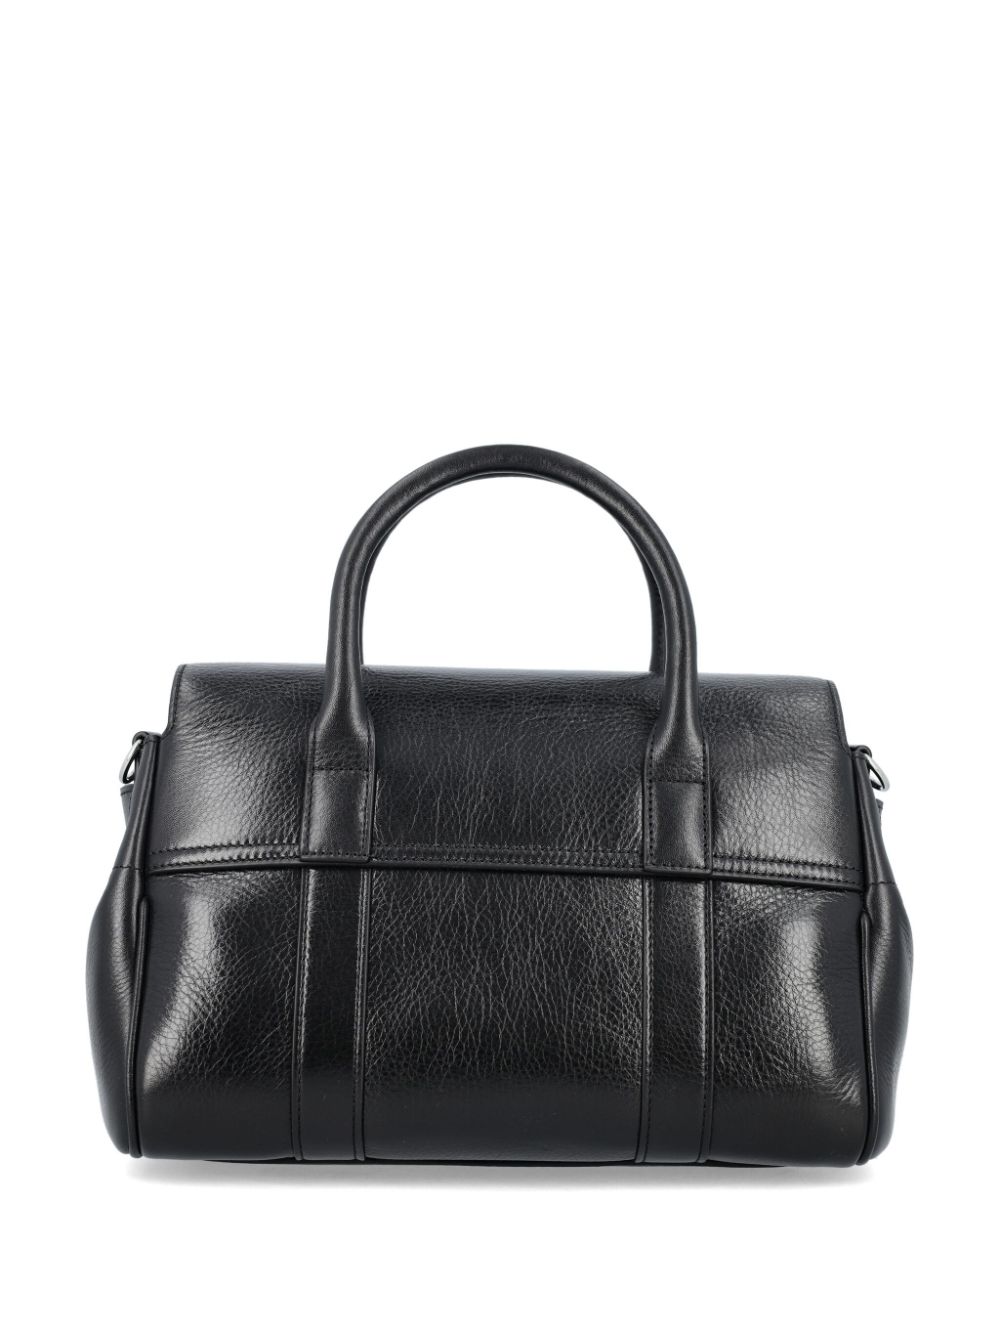 Mulberry small Bayswater leather tote bag - Zwart